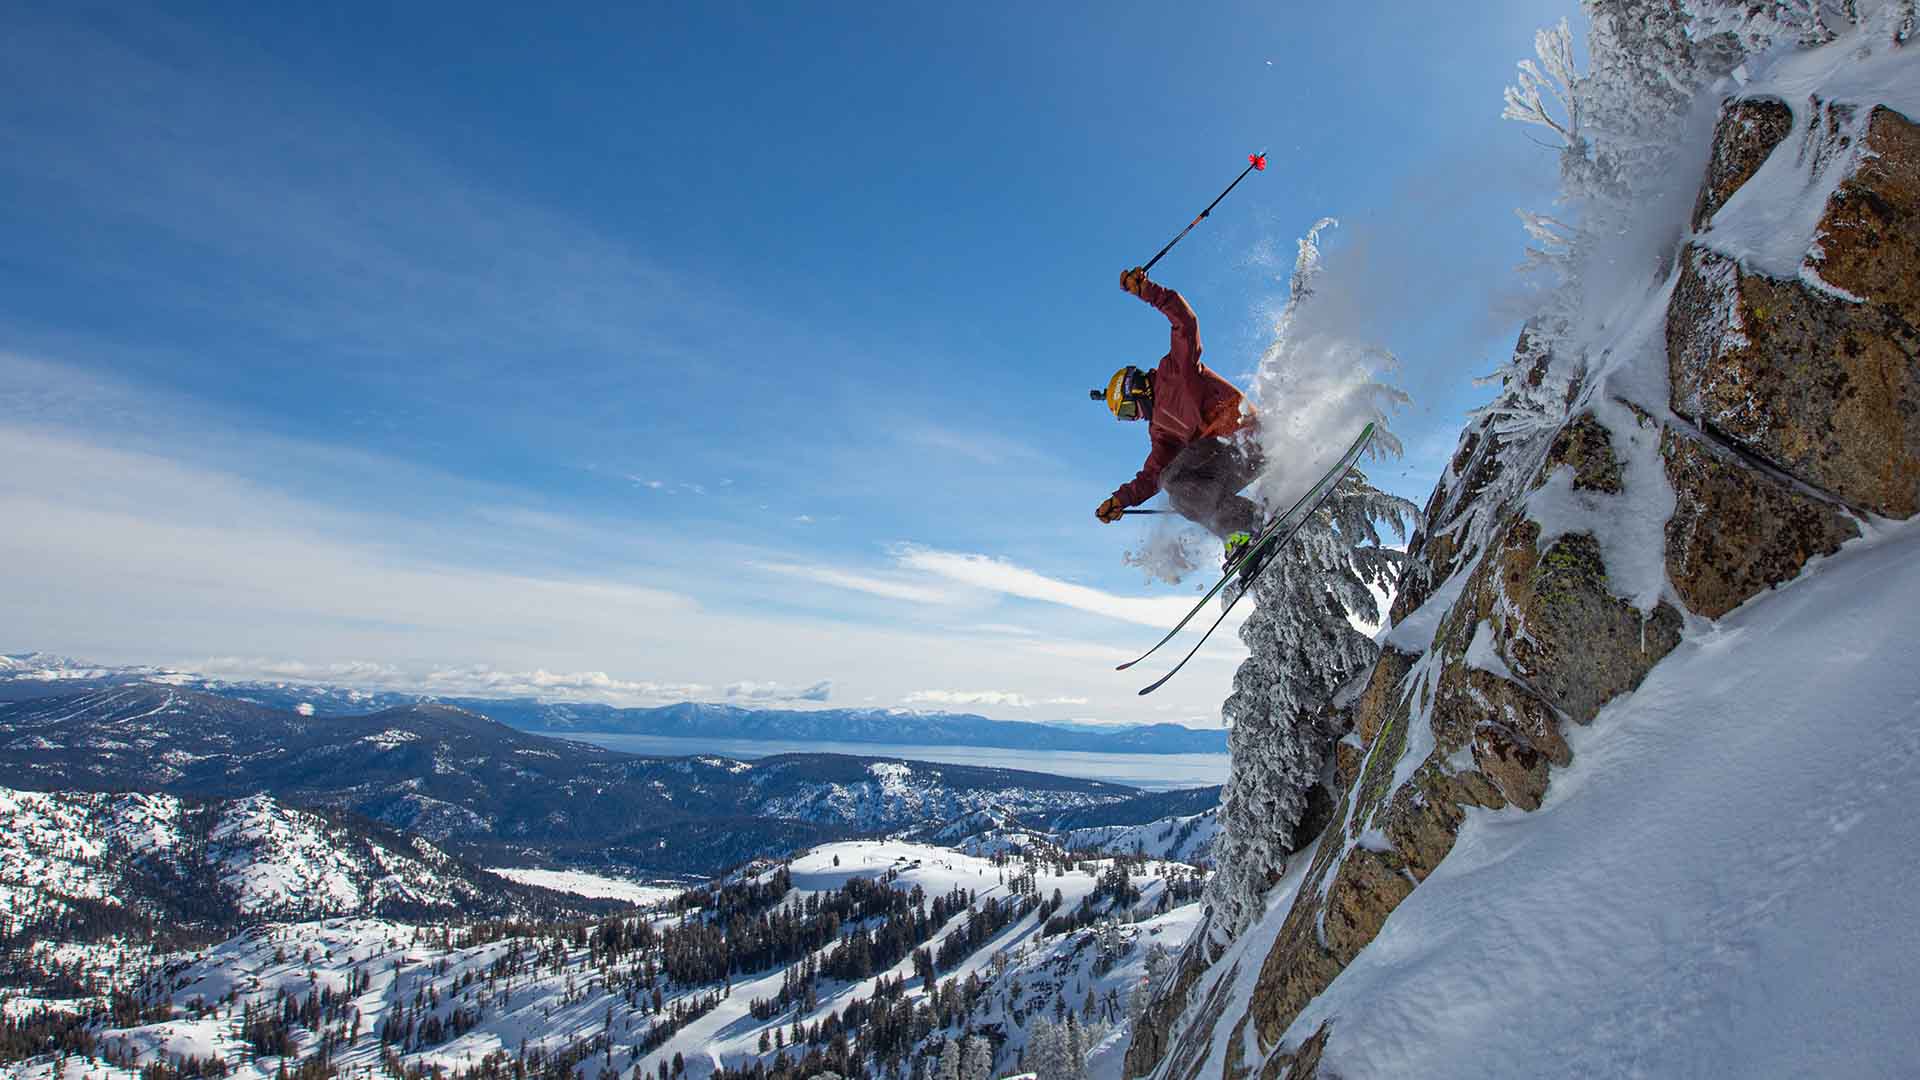 A skier hucks a cliff at Palisades with a view of Lake Tahoe in the background.